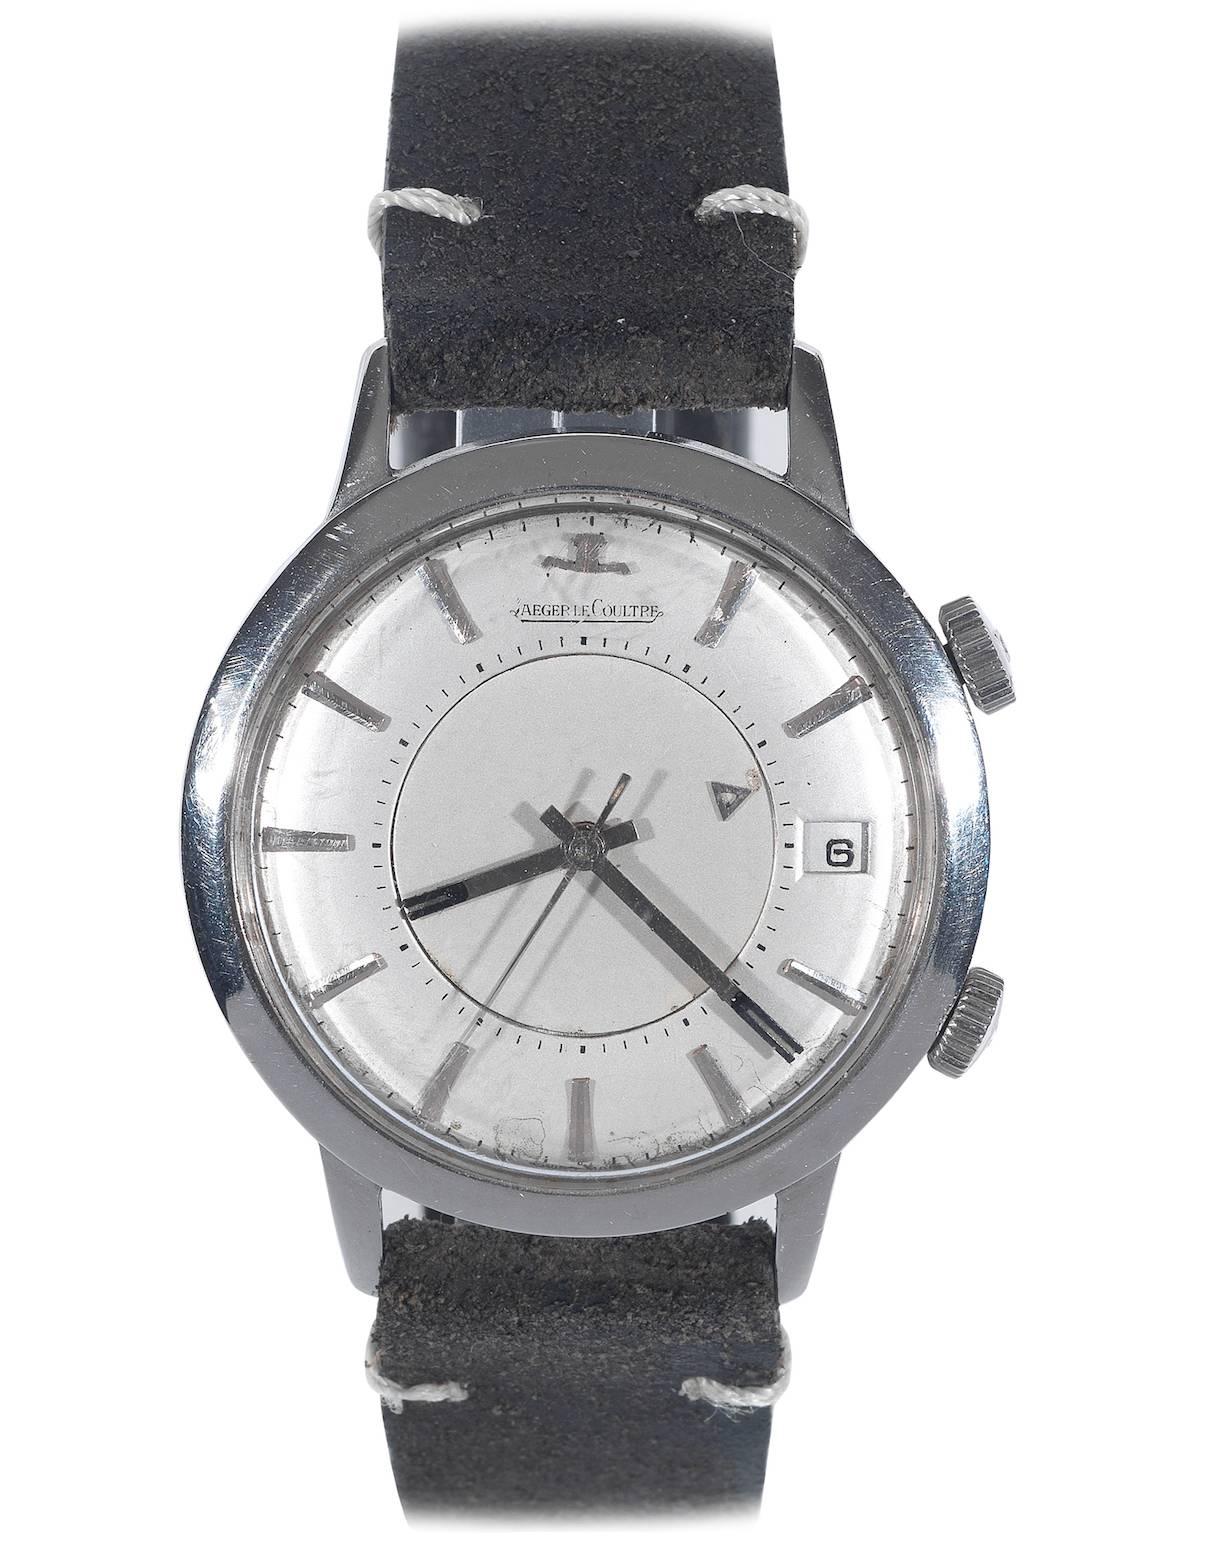 
PLEASE NOTE: OUR PRICE IS FULLY INCLUSIVE OF SHIPPING, IMPORTATION TAXES & DUTIES.

Ref. 855. Case No. 1139704. Made circa 1960

Fine, center seconds, self-winding, stainless steel wristwatch with alarm, date and 2 crowns. Case three-body,